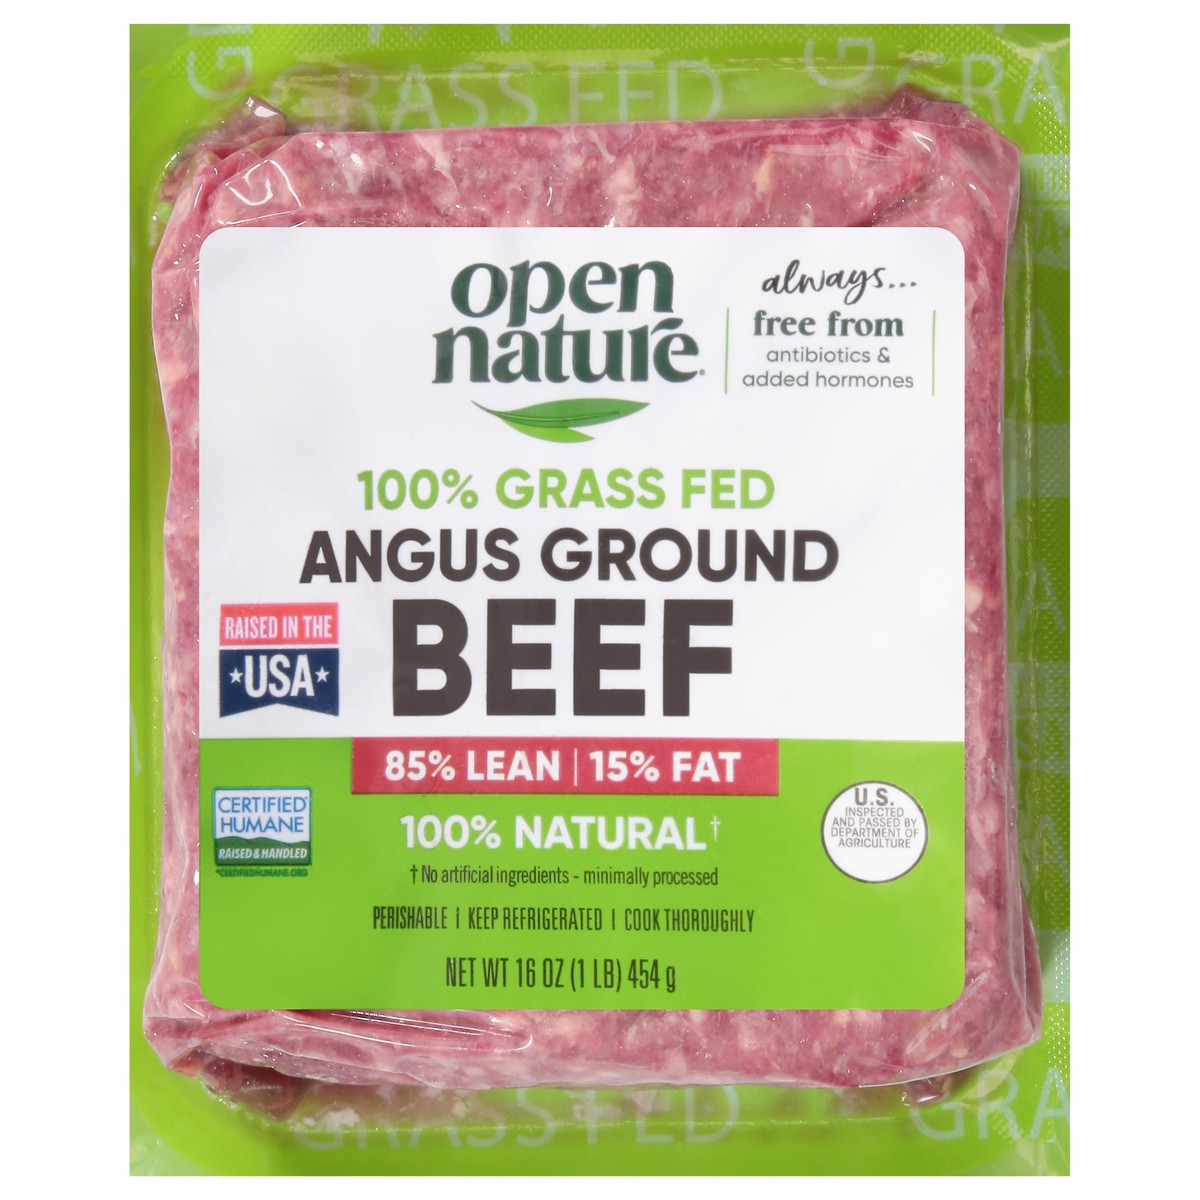 slide 1 of 11, Open Nature Beef, Ground, 85% Lean, Angus, Grass Fed, 